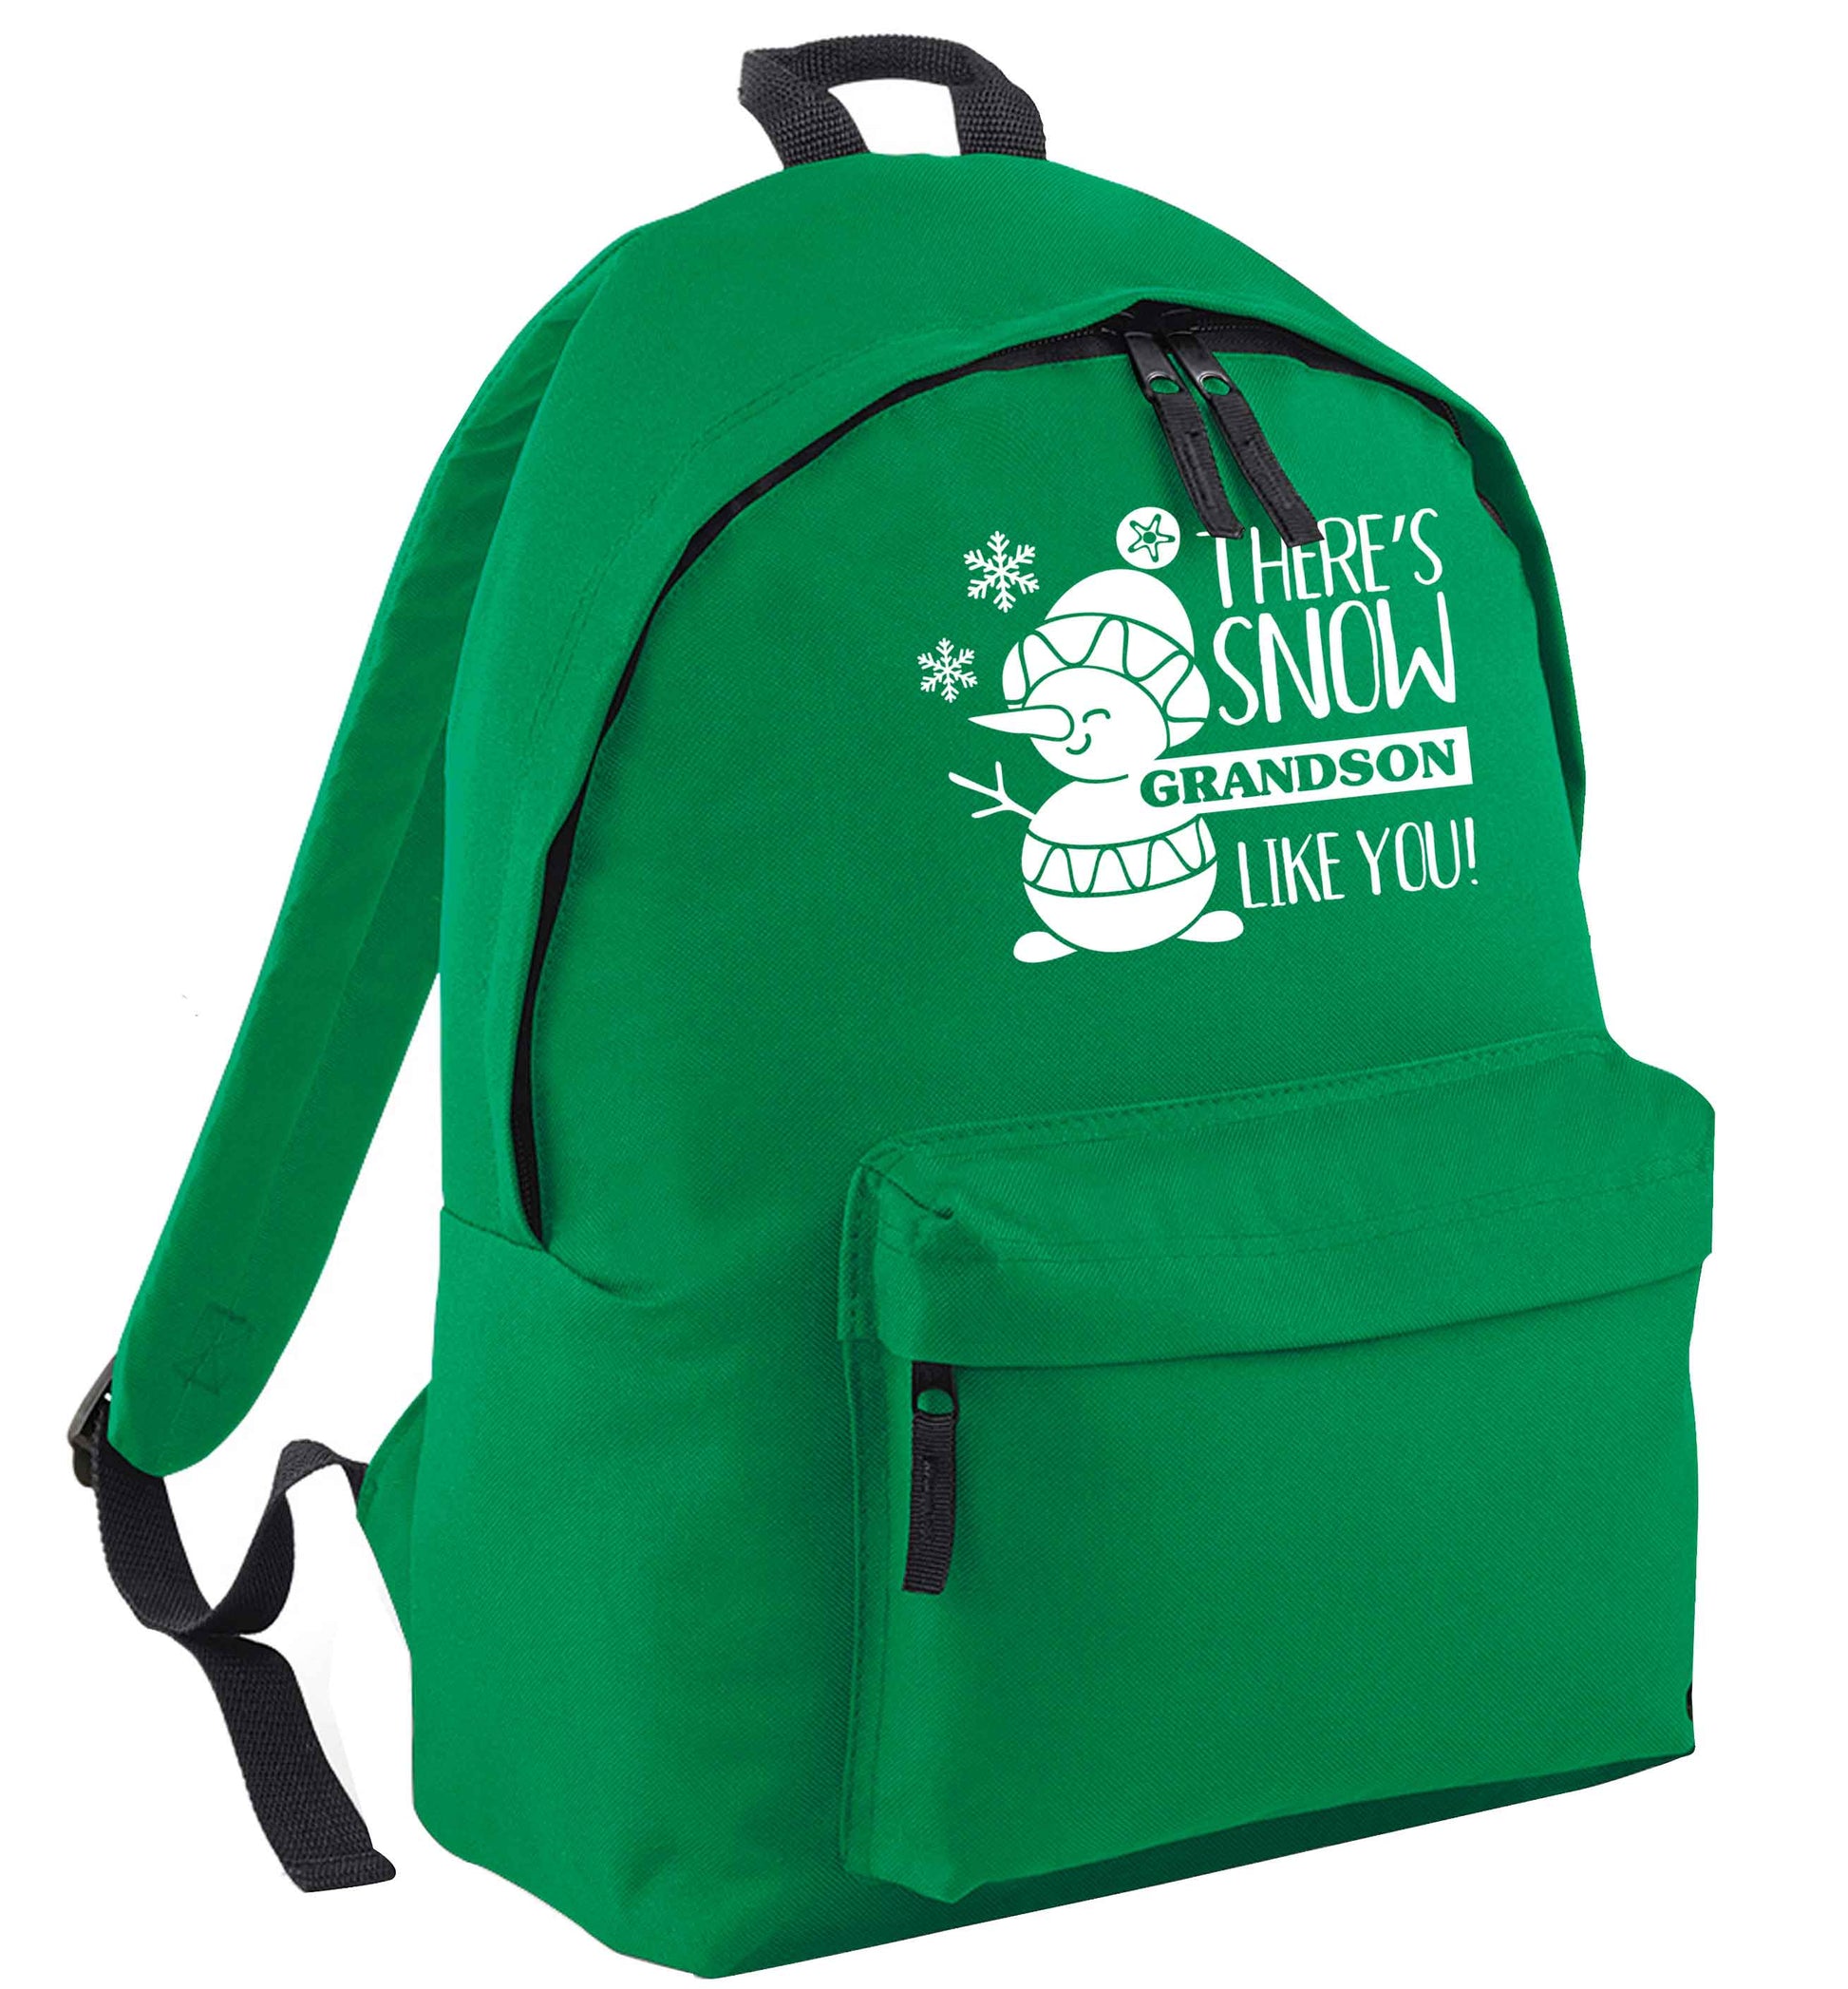 There's snow grandson like you green adults backpack